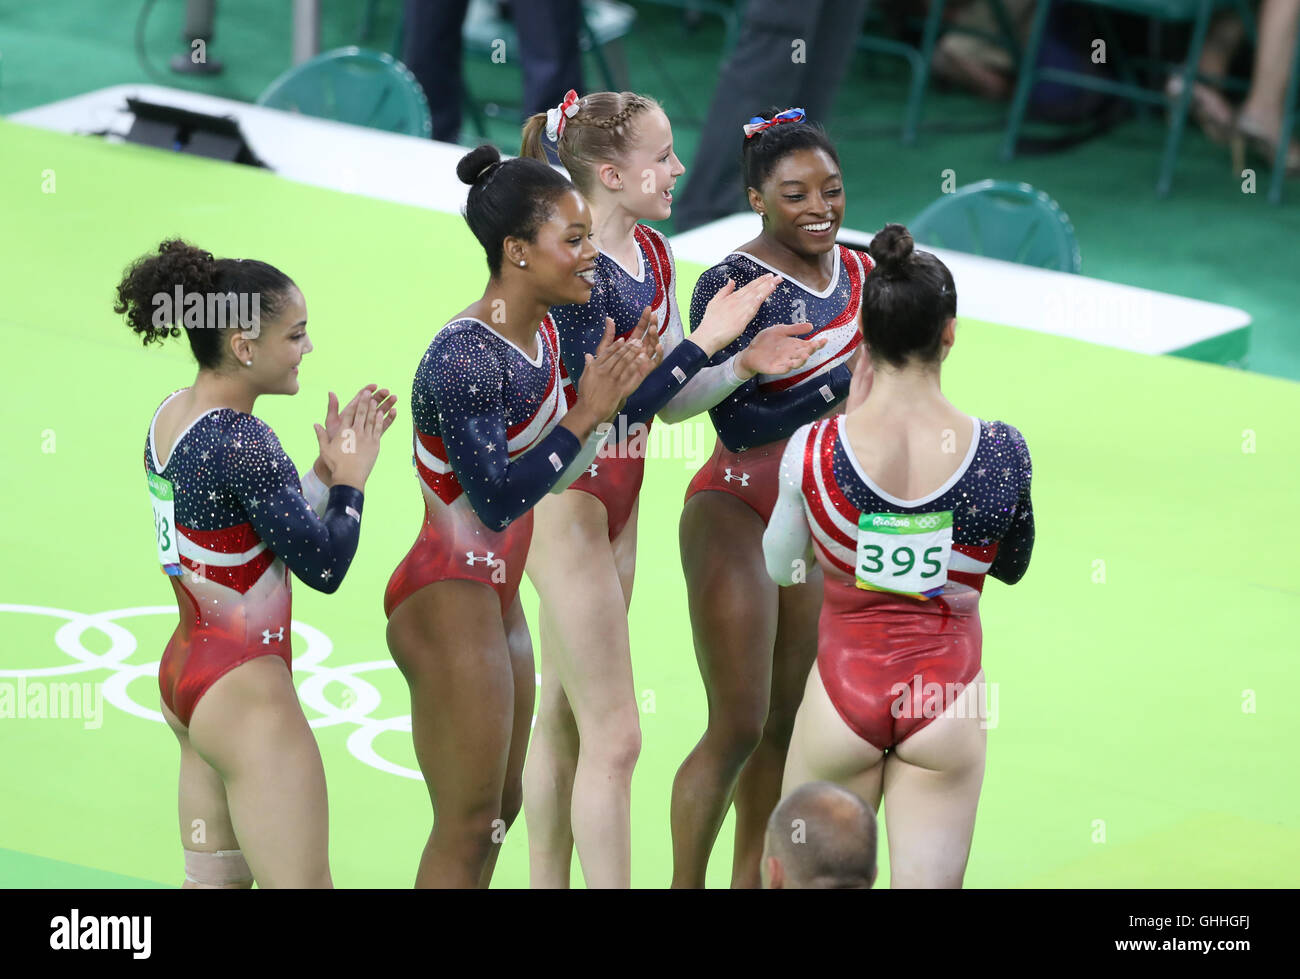 USA's Simone Biles (top right) and team-mates celebrate winning gold in the Women's Gymnastics Team Final at the Rio Olympic Arena on the fourth day of the Rio Olympic Games, Brazil. PRESS ASSOCIATION Photo. Picture date: Tuesday August 9, 2016. Photo credit should read: Martin Rickett/PA Wire. RESTRICTIONS - Editorial Use Only. Stock Photo